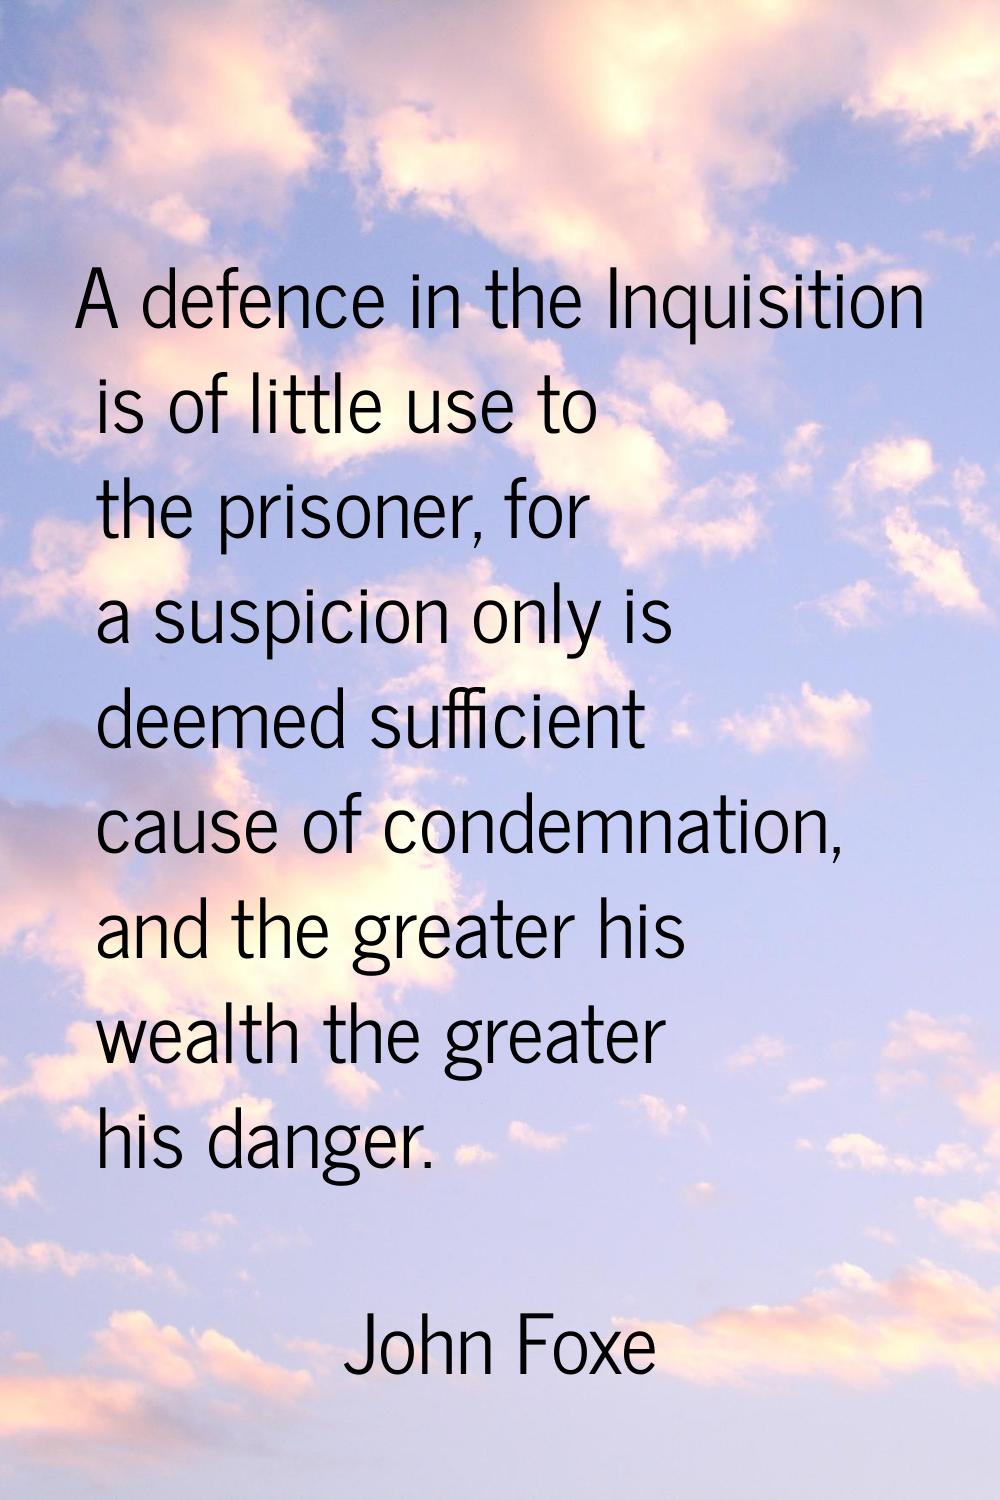 A defence in the Inquisition is of little use to the prisoner, for a suspicion only is deemed suffi